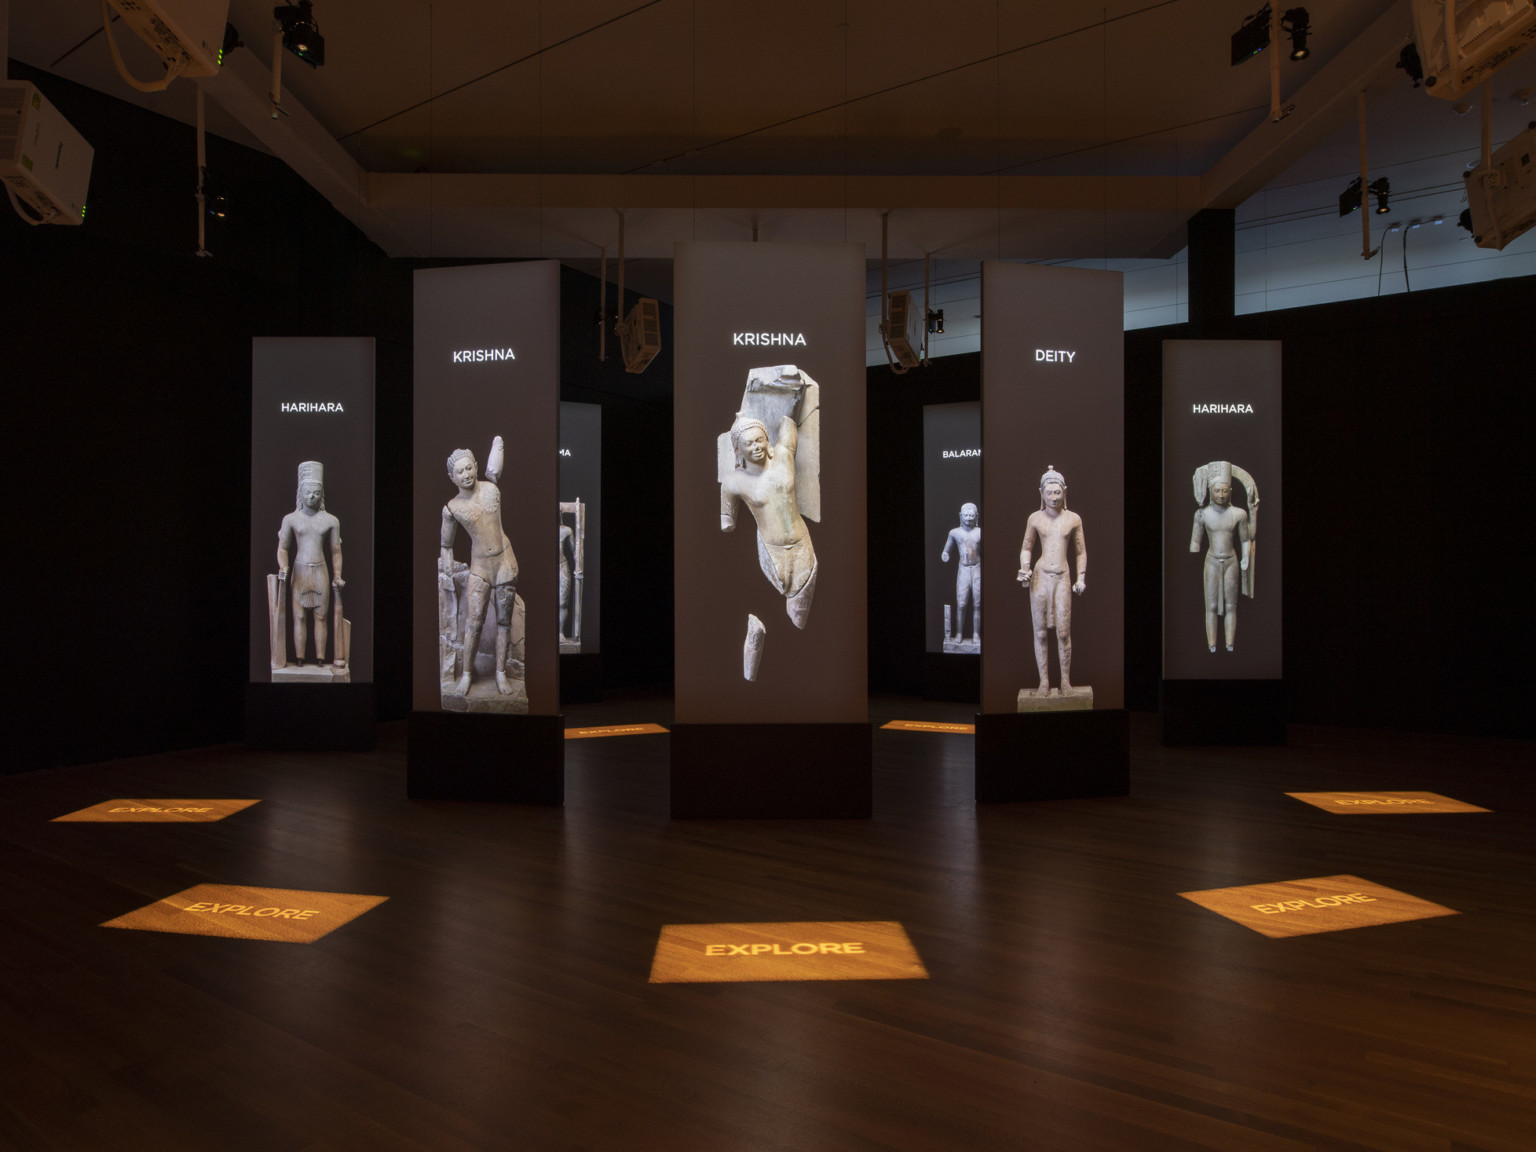 a darkened room with screens and stone statue images suspended in a circle pattern with illuminated signage on the wood floor